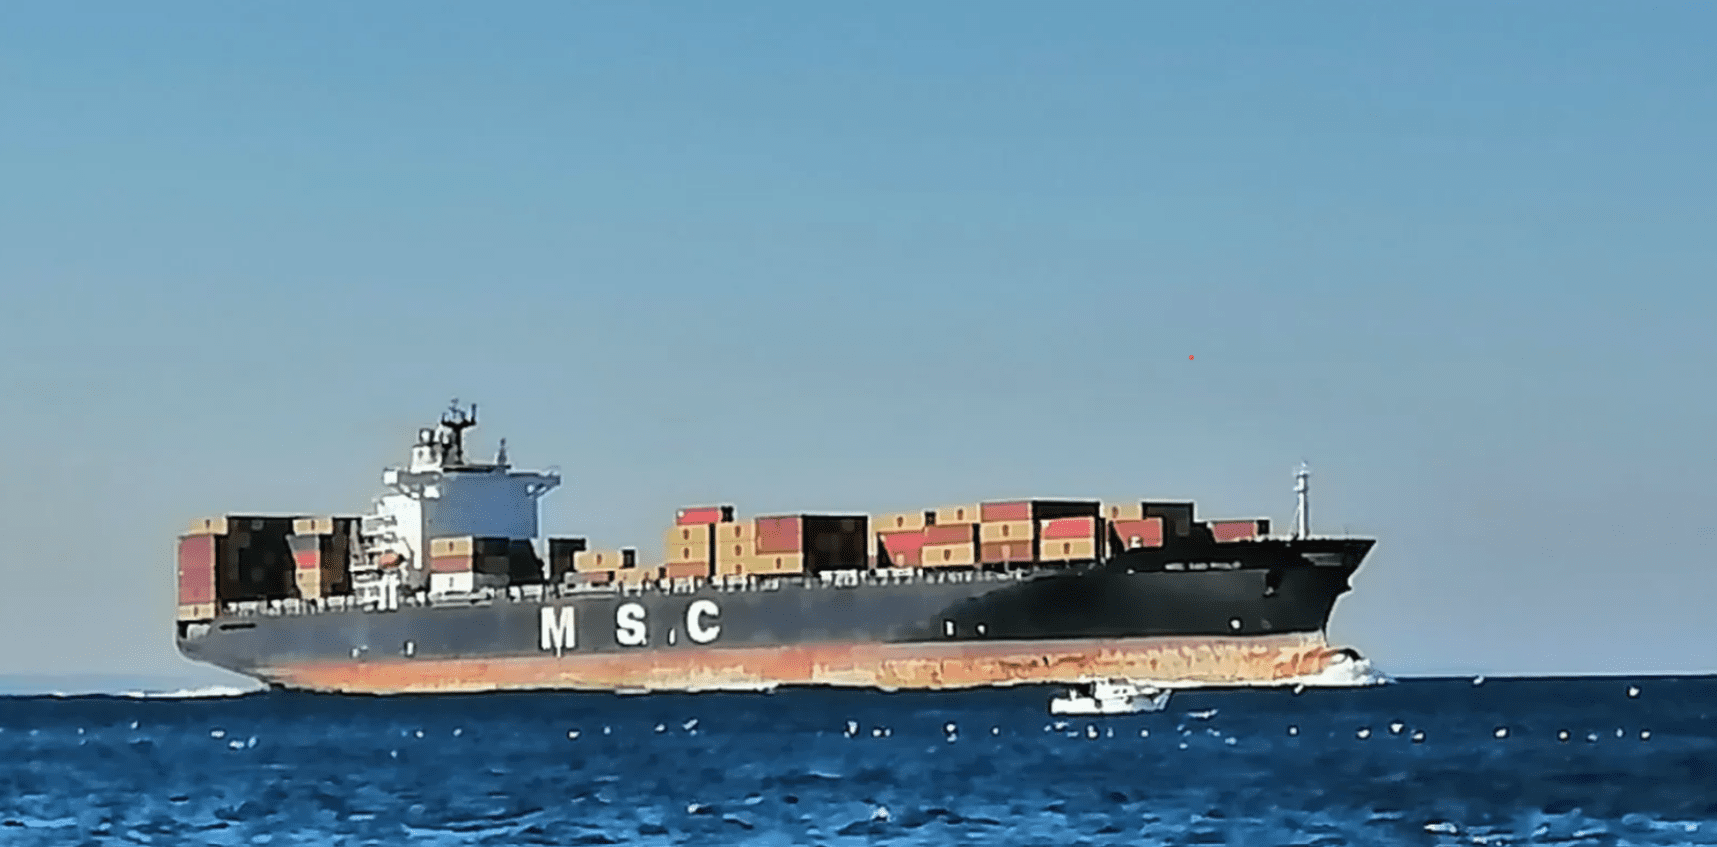 Efforts Continue to Douse Fire Aboard MSC Containership in St. Lawrence River